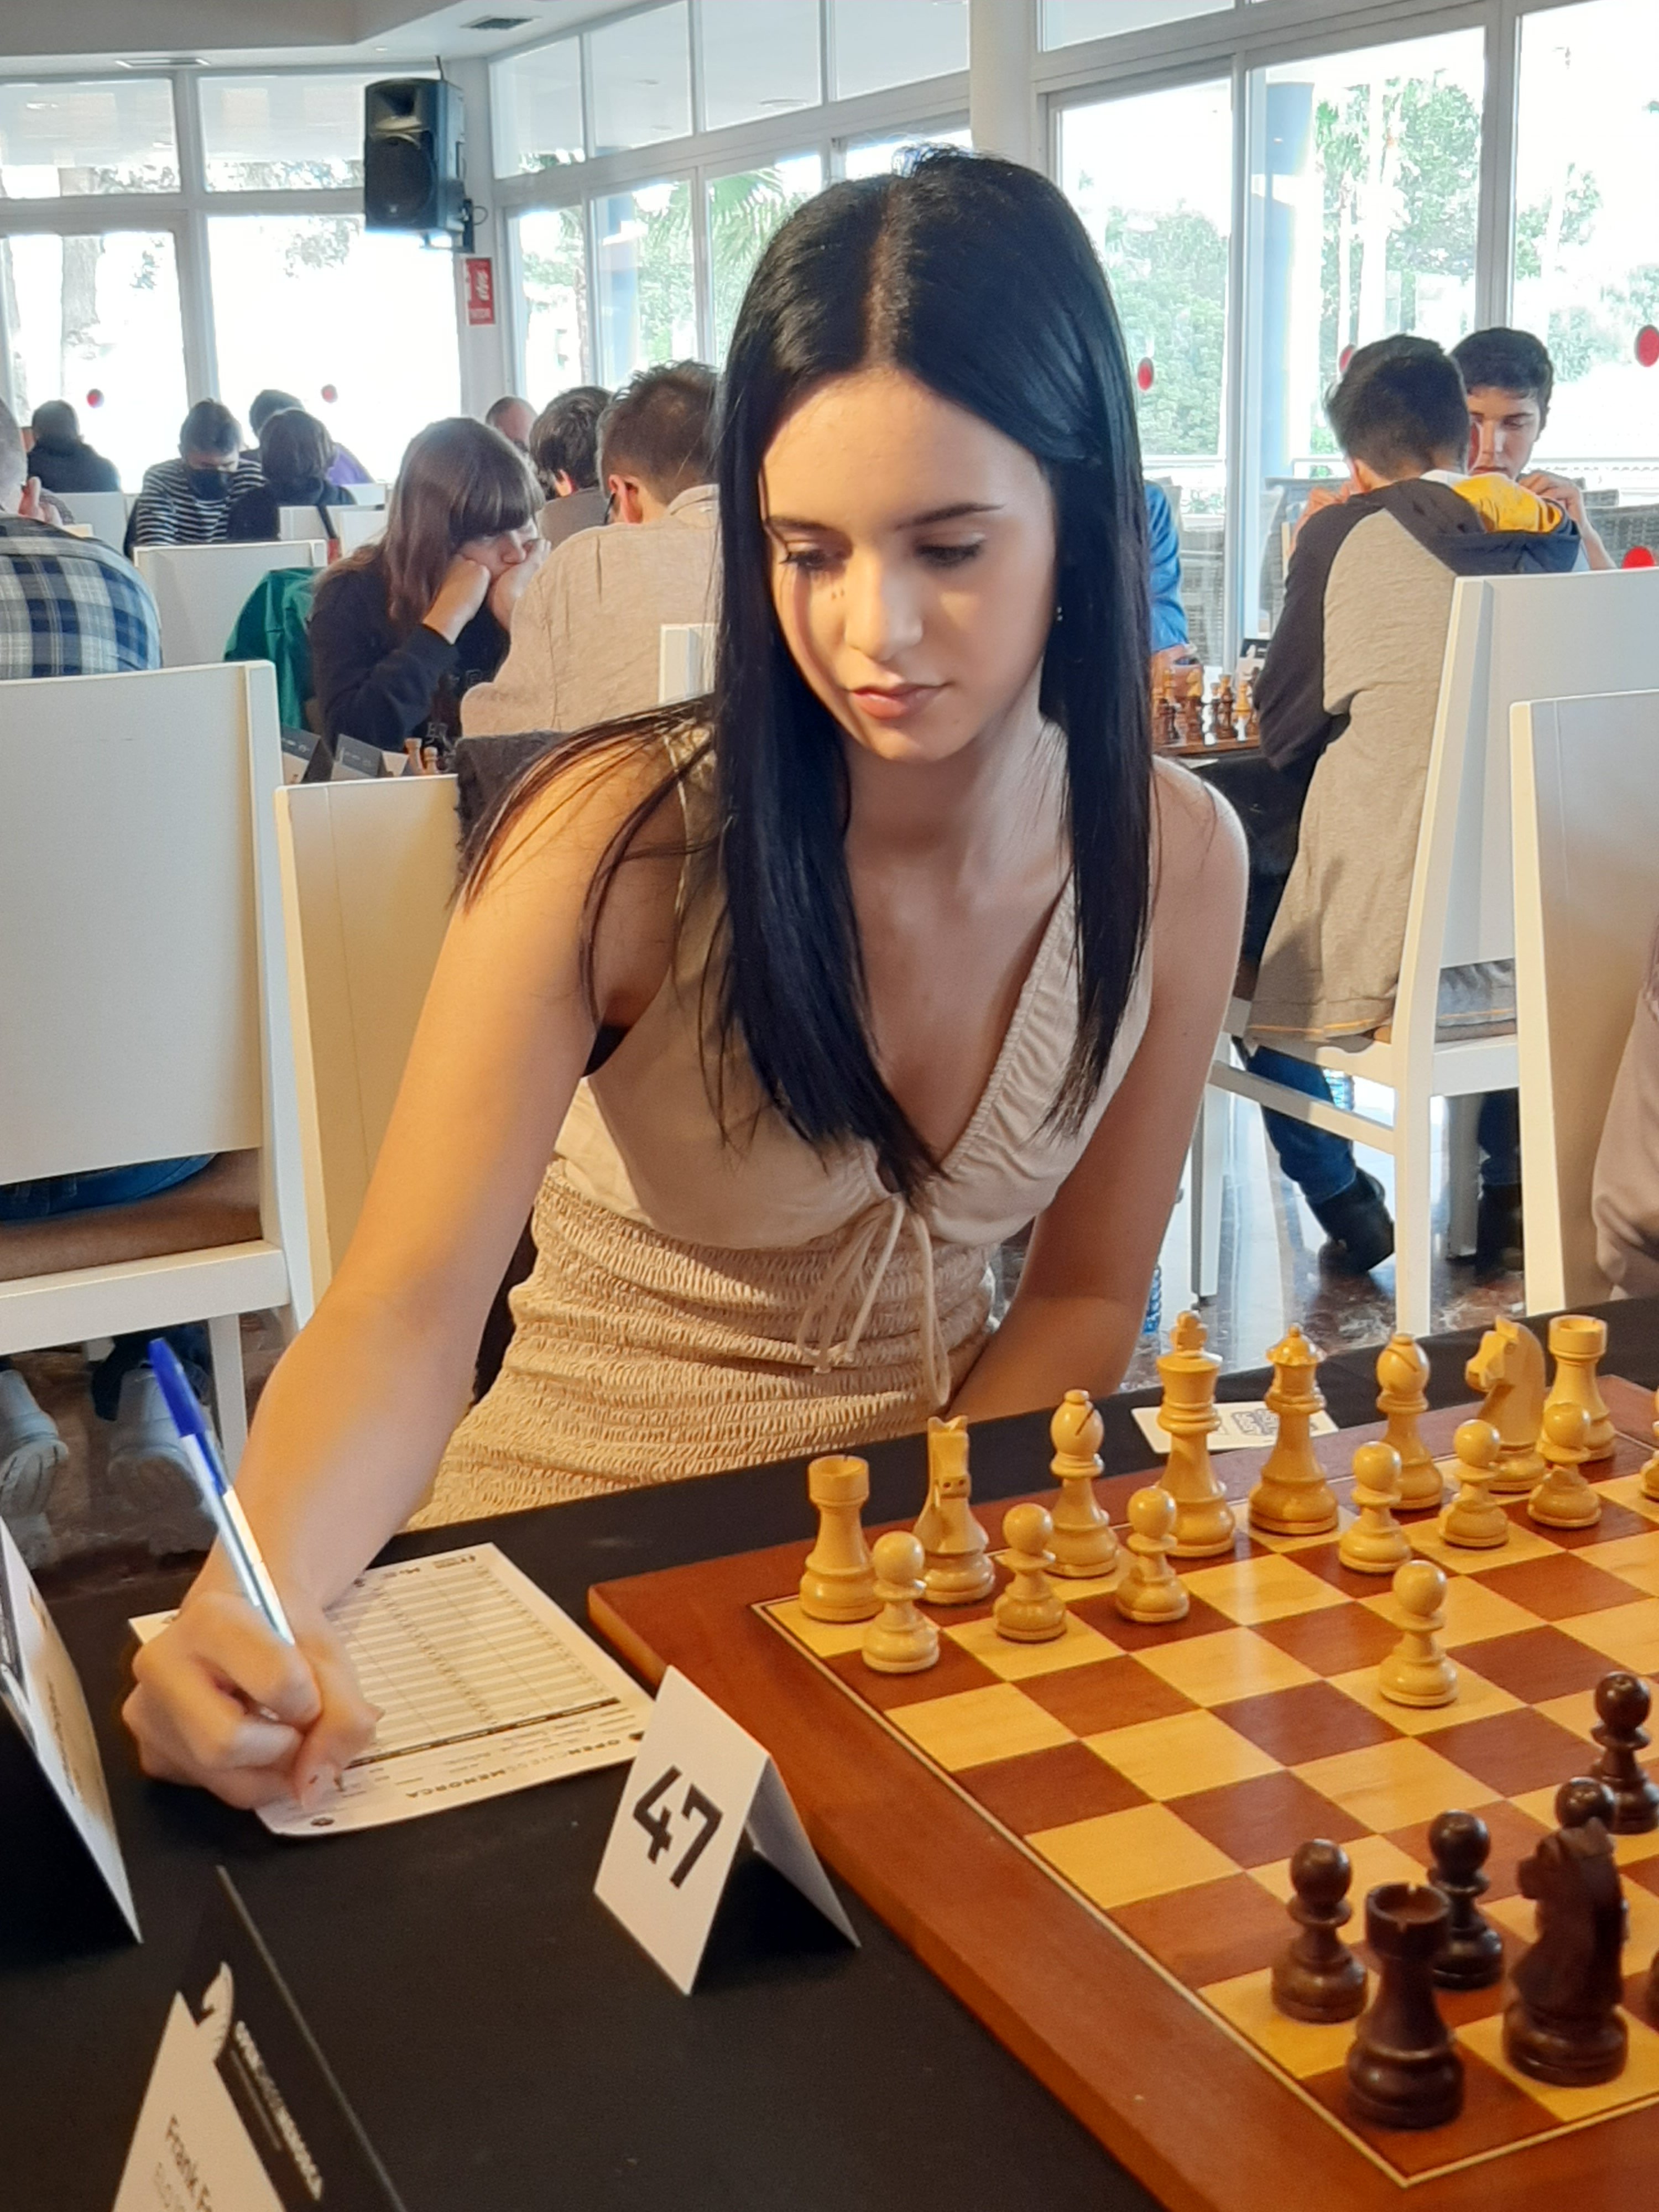 Chess Pathshala on X: The @ChessMenorca #Chess Open is going on